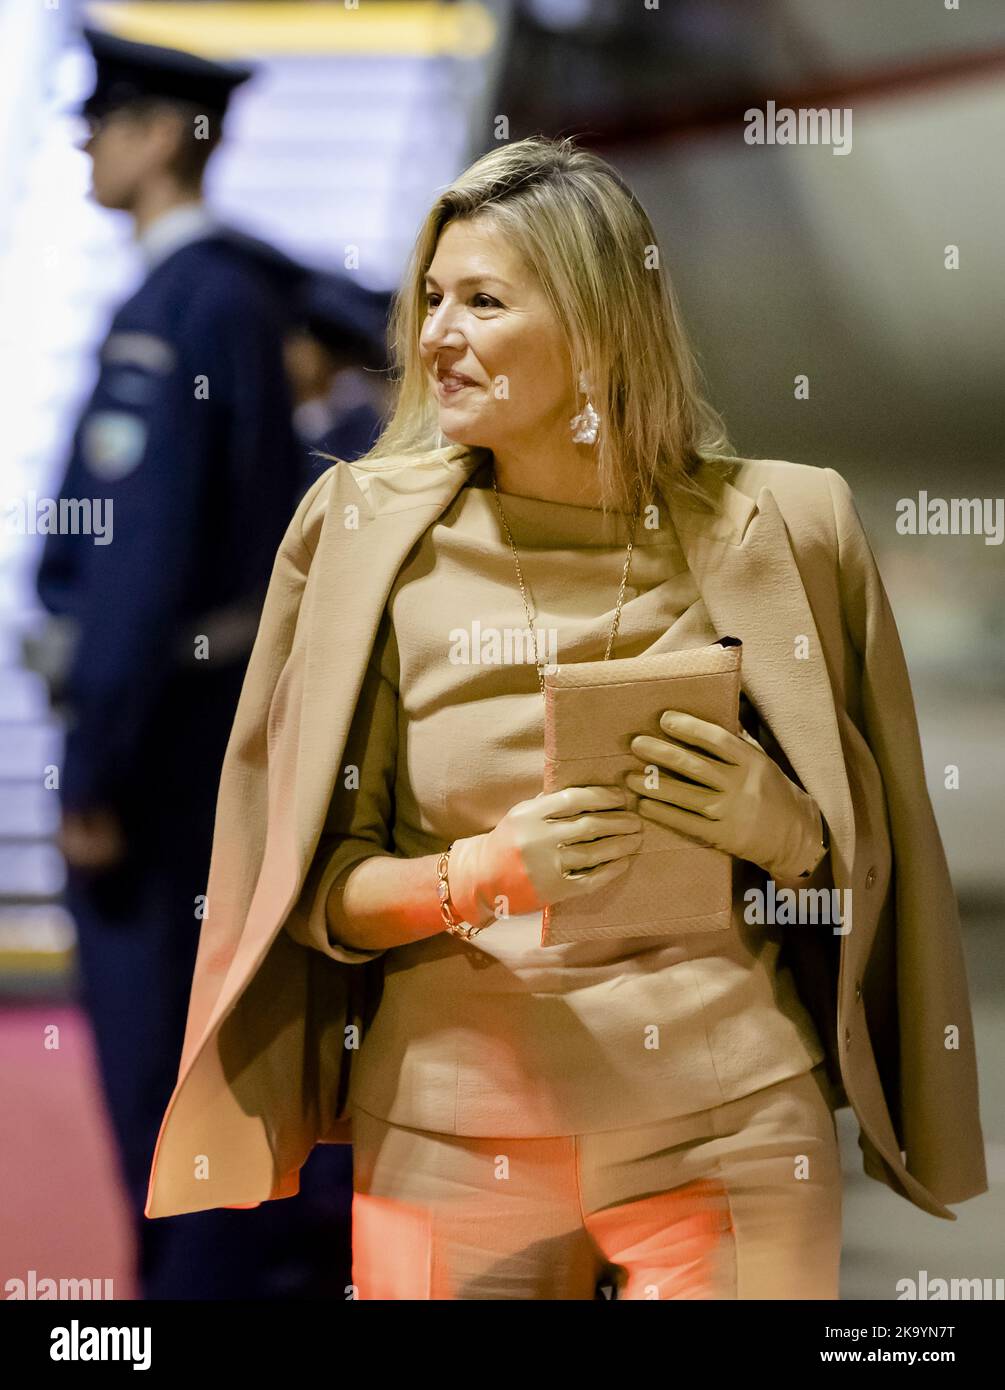 2022-10-30 22:27:06 ATHENS - Queen Maxima arrives at Athens International Airport for a three-day state visit to Greece. The visit was postponed twice, first because of corona, then because of the Russian invasion of Ukraine. ANP SEM VAN DER WAL netherlands out - belgium out Stock Photo